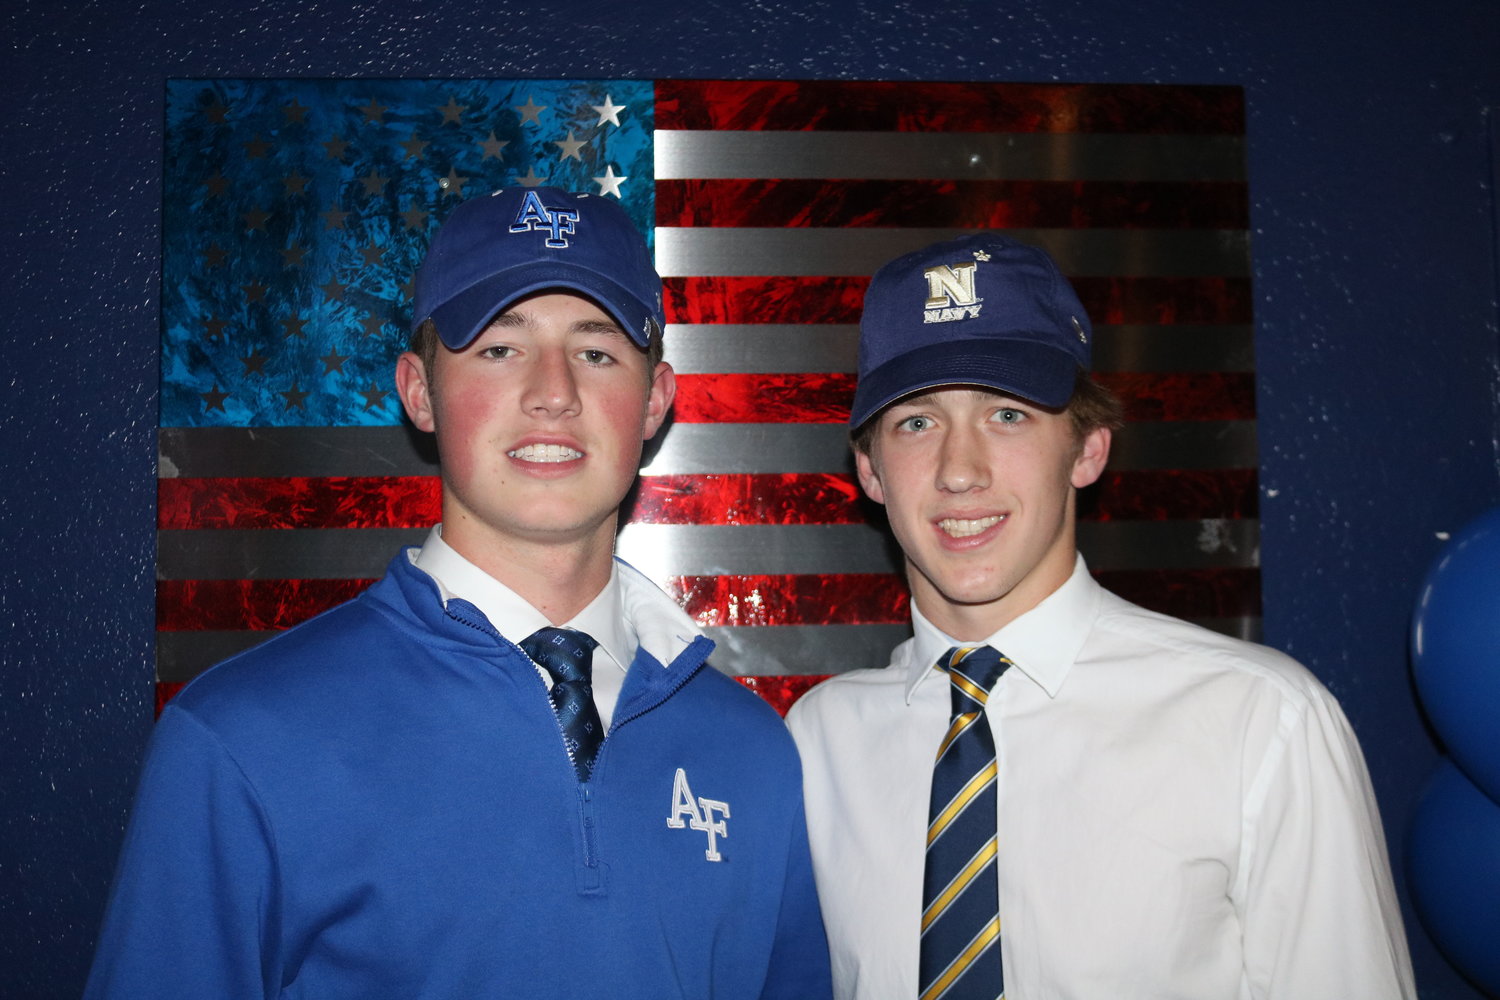 Ponte Vedra teammates Will Henne and Luke Pirris both signed to play FBS football during a celebration at Mr. Chubby’s Wings Dec. 15. Henne signed with Air Force and Pirris with Navy.